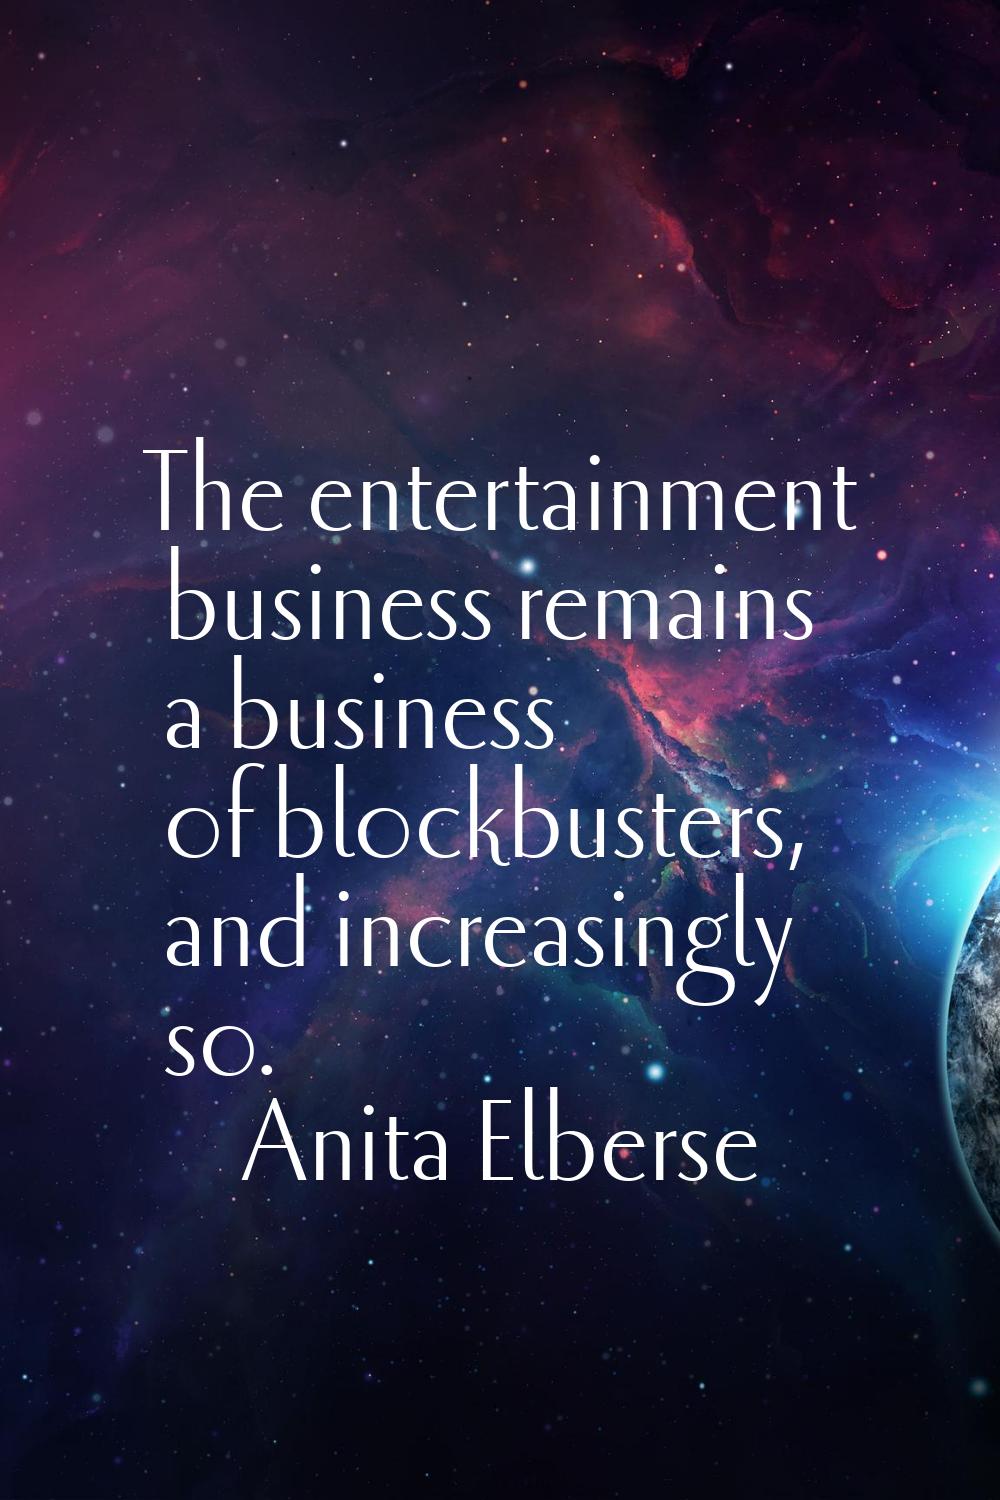 The entertainment business remains a business of blockbusters, and increasingly so.